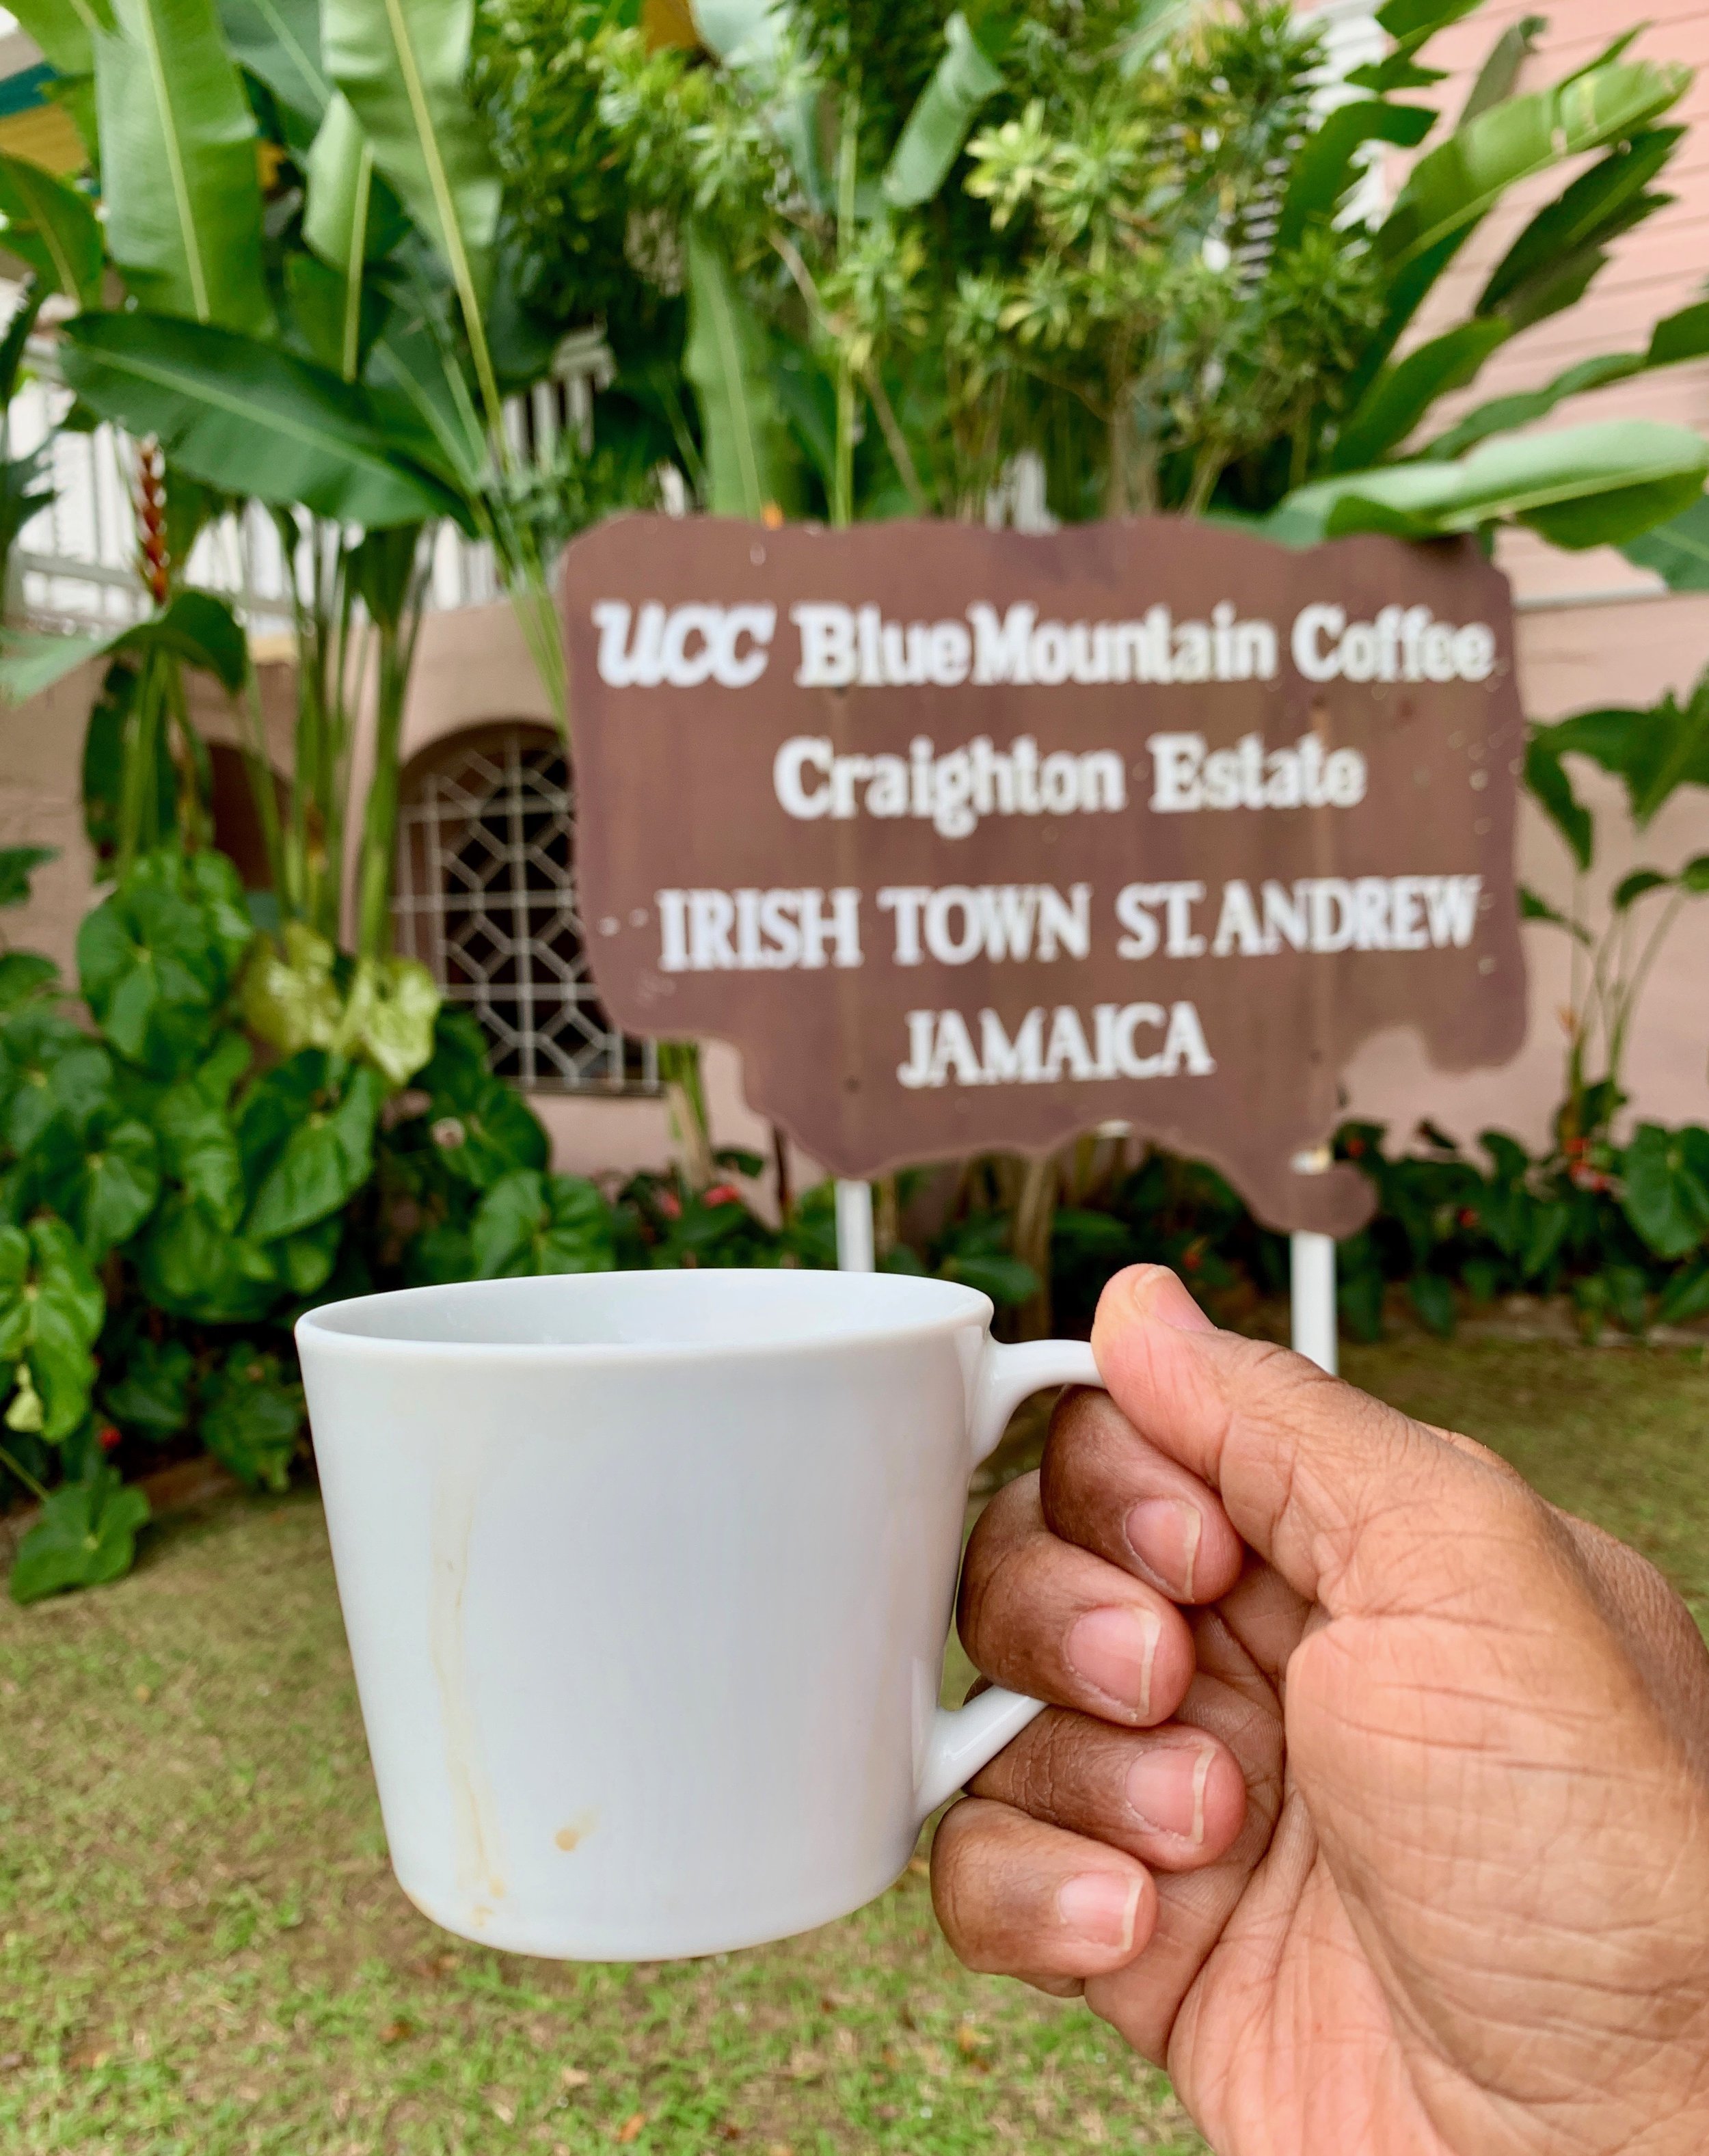  Straight from the airport, I drove an hour from Kingston to tour Craighton Estate, one of a handful of small growers of Jamaica’s Blue Mountain coffee. It’s high quality and limited quantity is why the brew can fetch up to  US$100 a pound! 